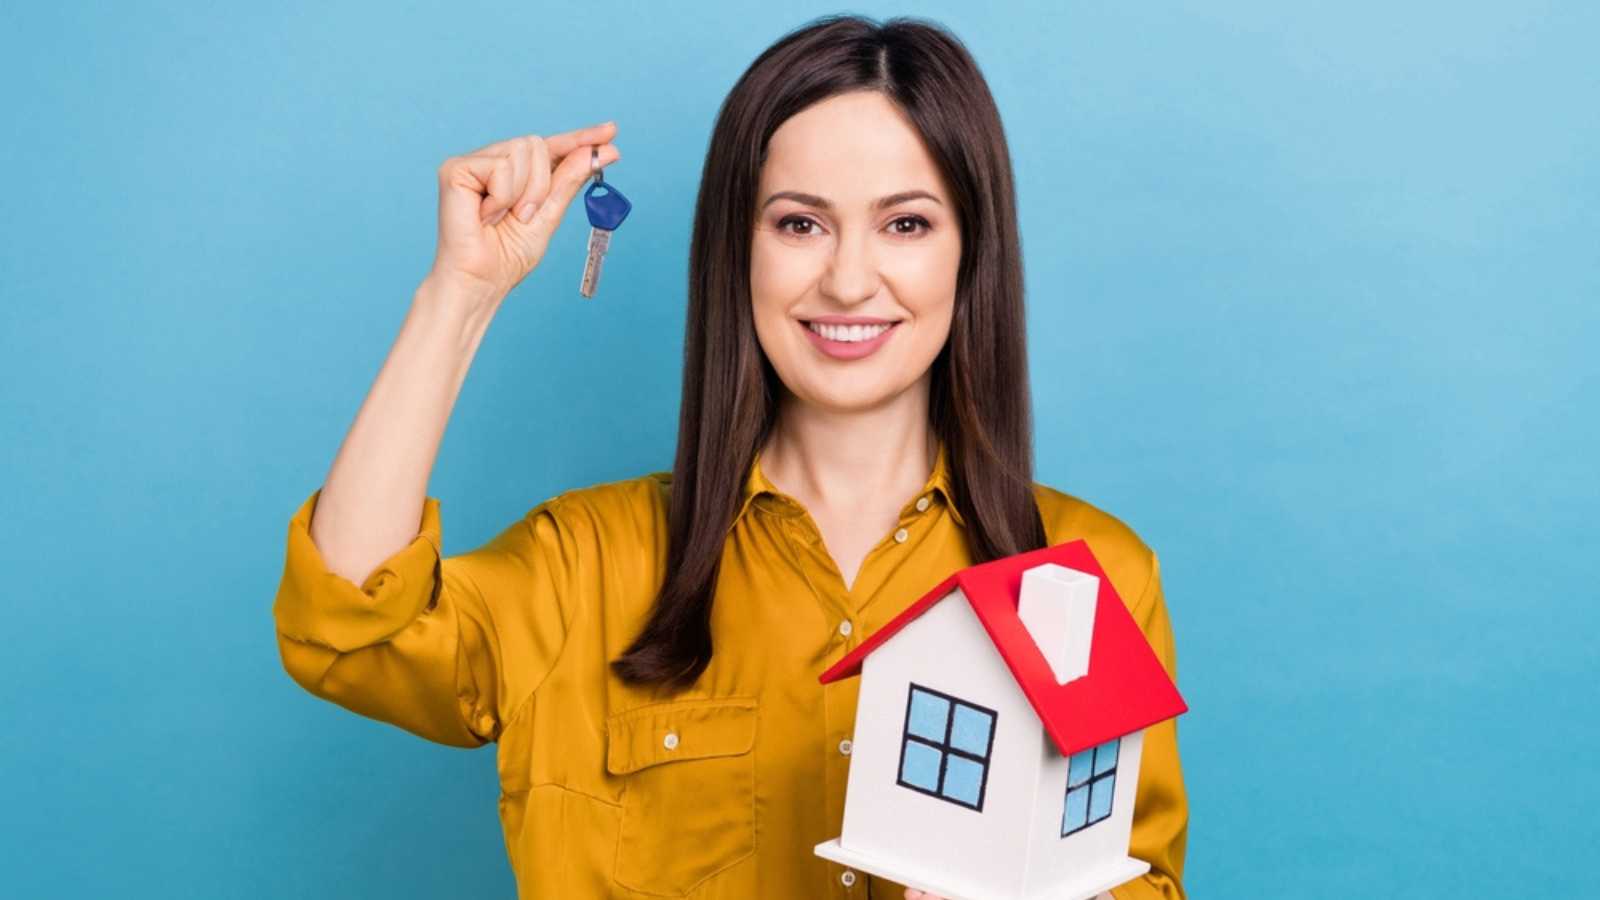 Woman With Toy House And Key